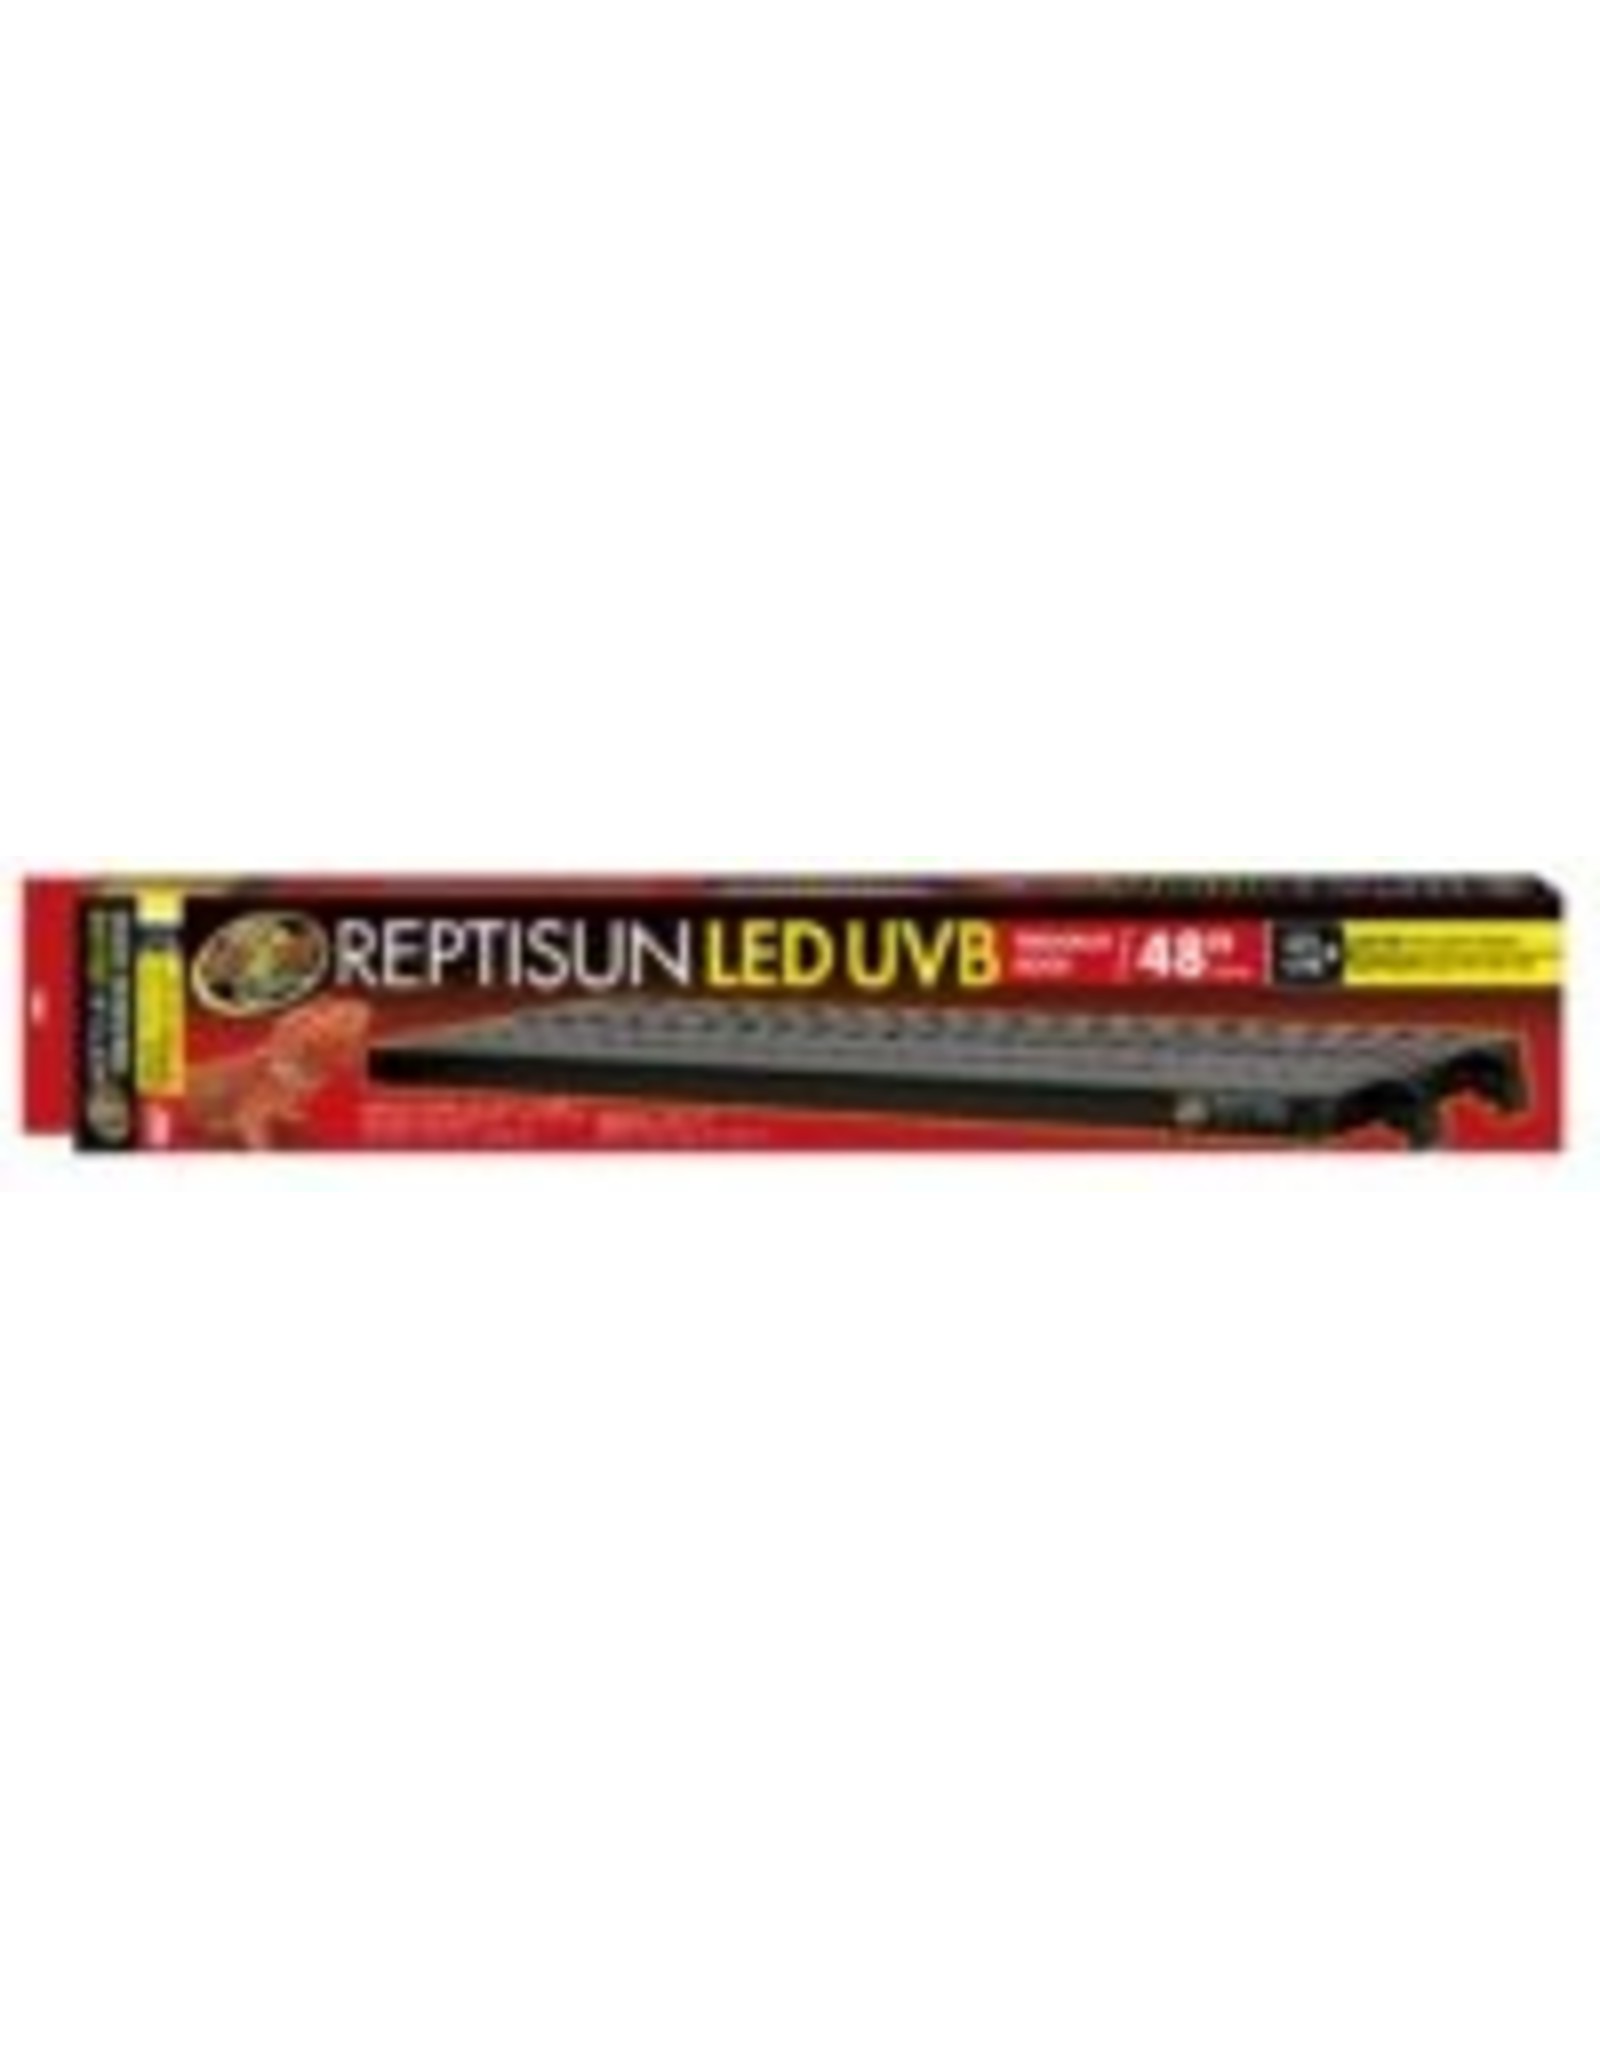 Zoo Med ZOO MED Reptisun LED UVB Fixture